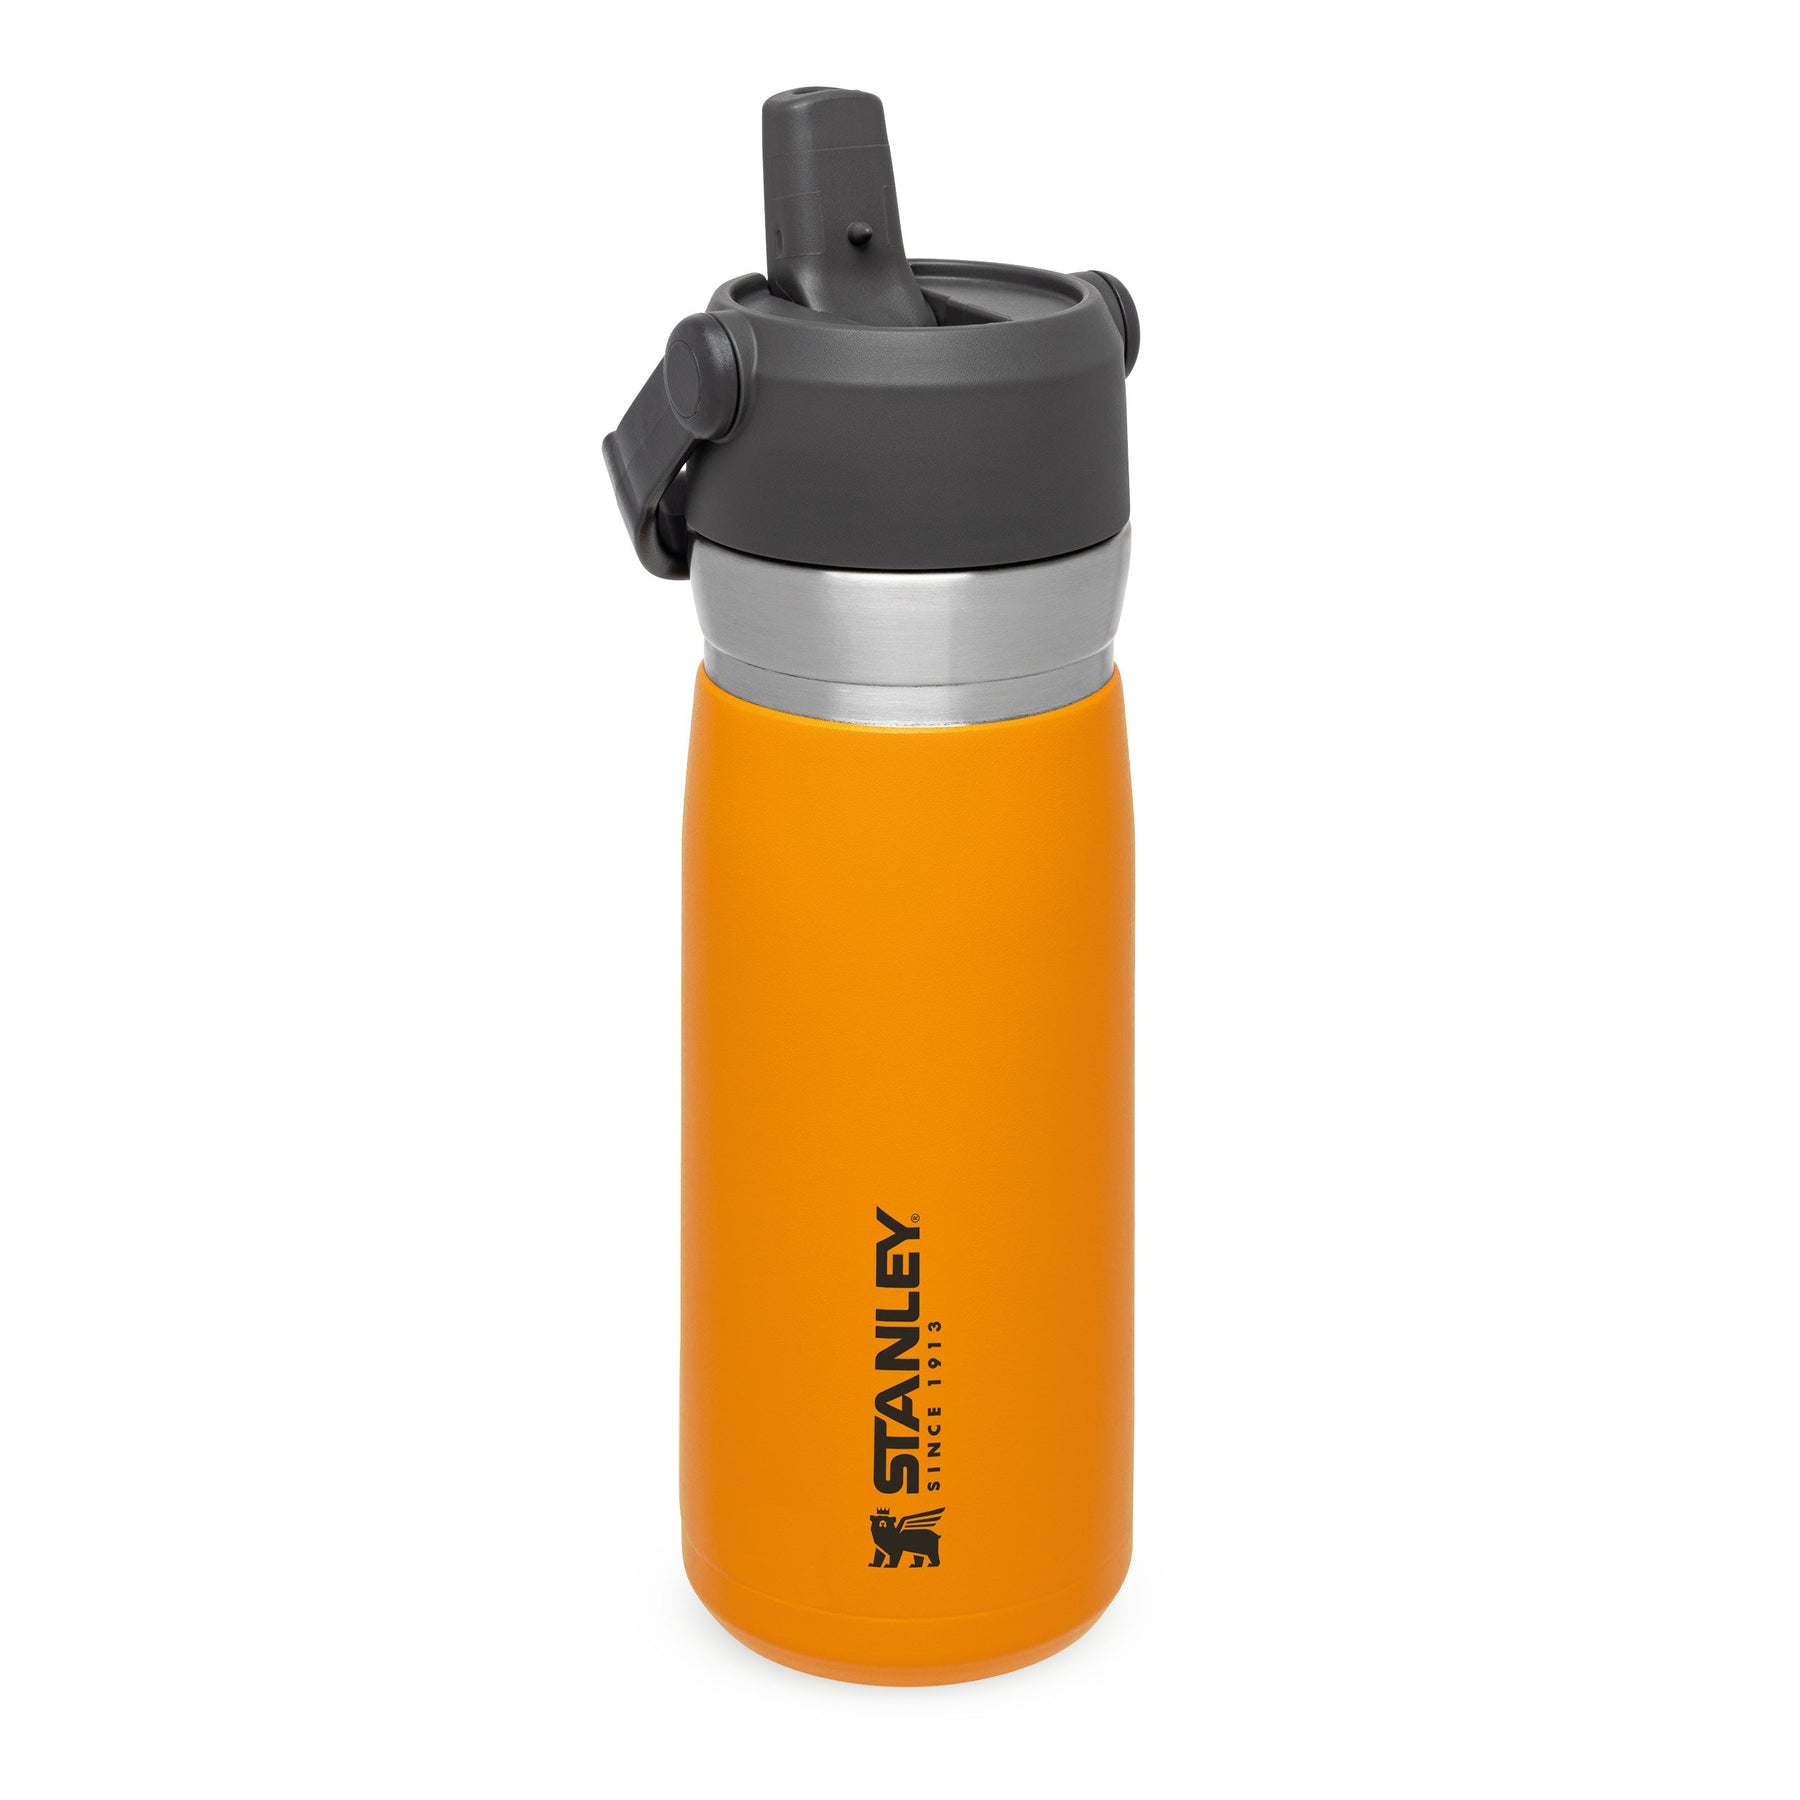  STANLEY Quick Flip Stainless Steel Water Bottle .71L / 24OZ  Polar – Leakproof Insulated Water Bottle - Push Button Locking Lid -  BPA-Free Thermos Flask - Cup Holder Compatible - Dishwasher